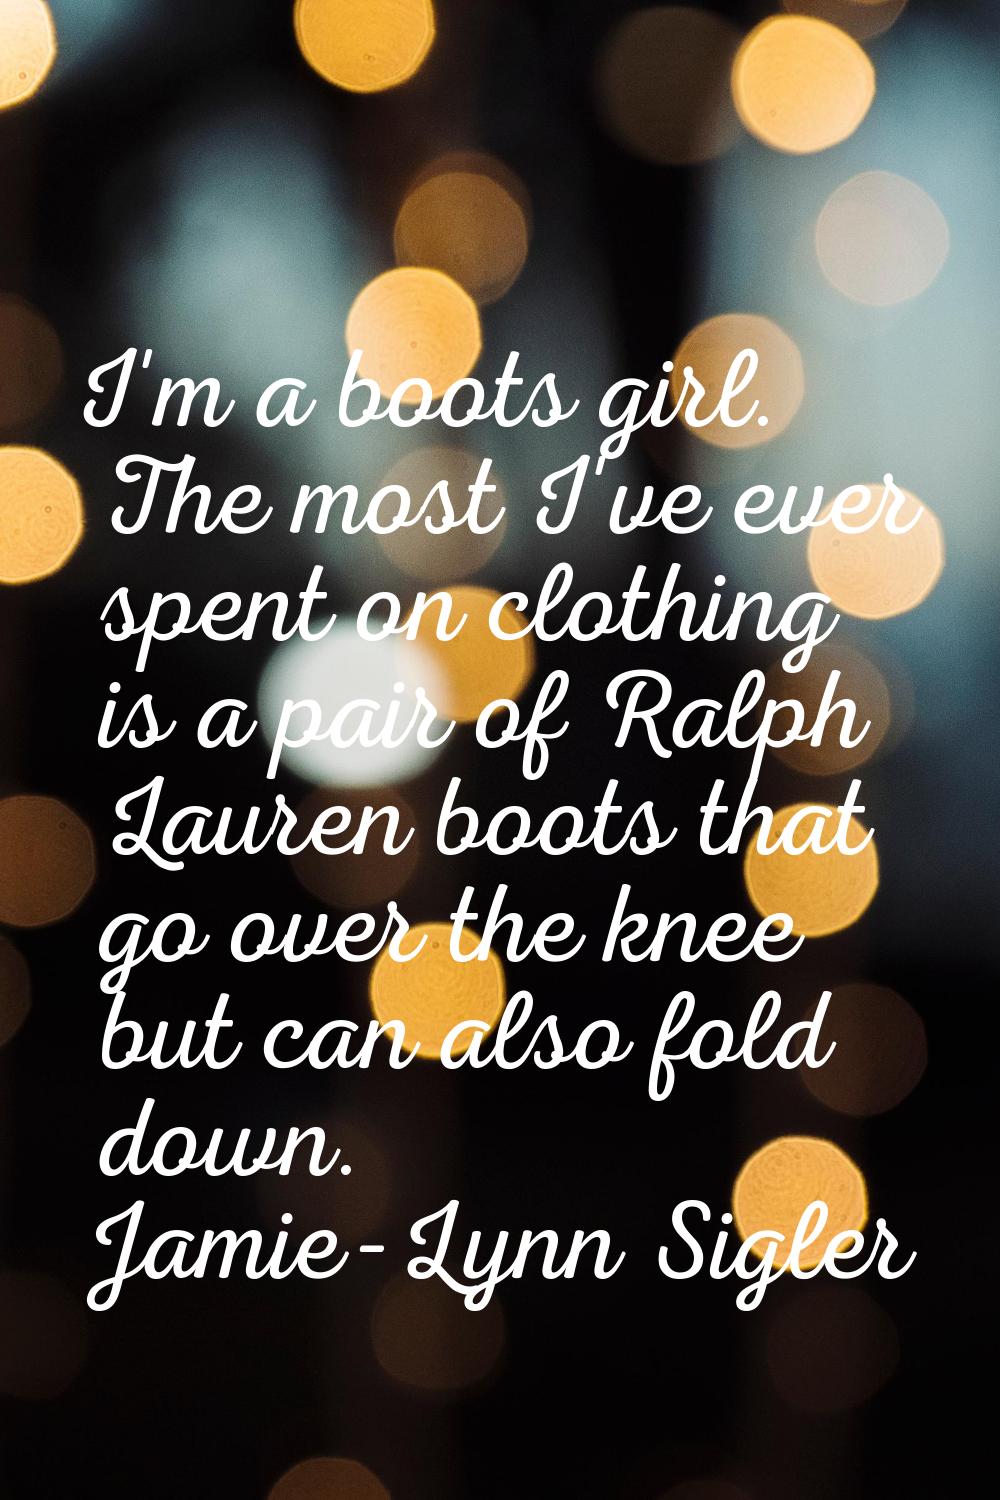 I'm a boots girl. The most I've ever spent on clothing is a pair of Ralph Lauren boots that go over